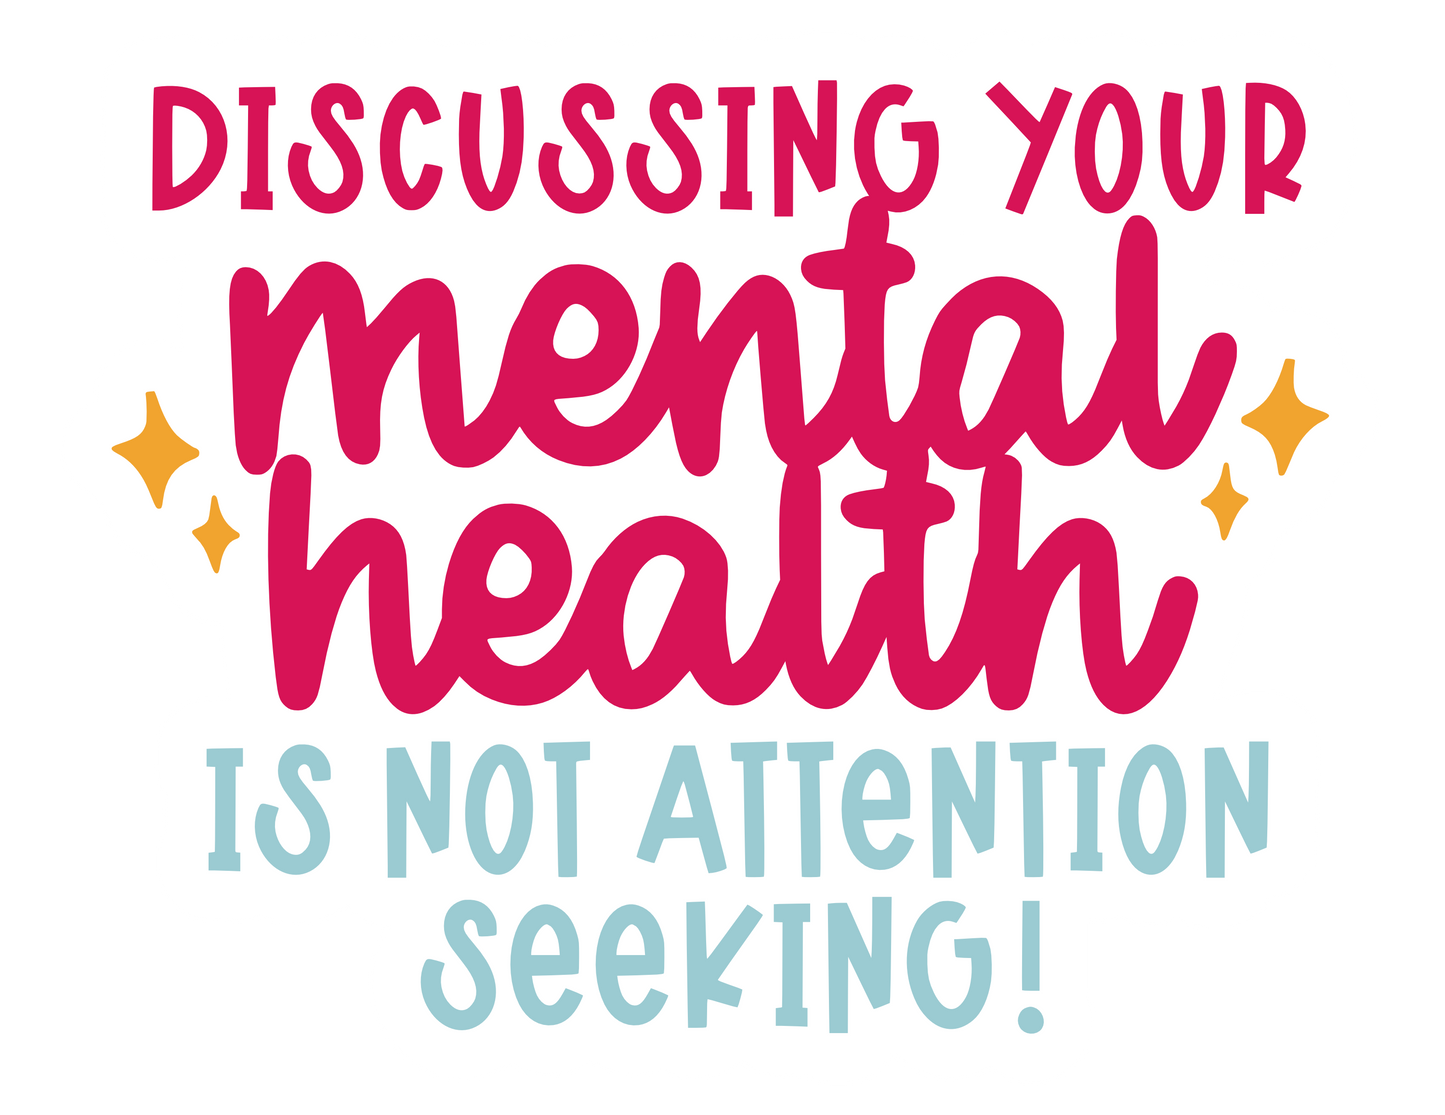 Discussing Your Mental Health Is Not Attention Seeking Sticker